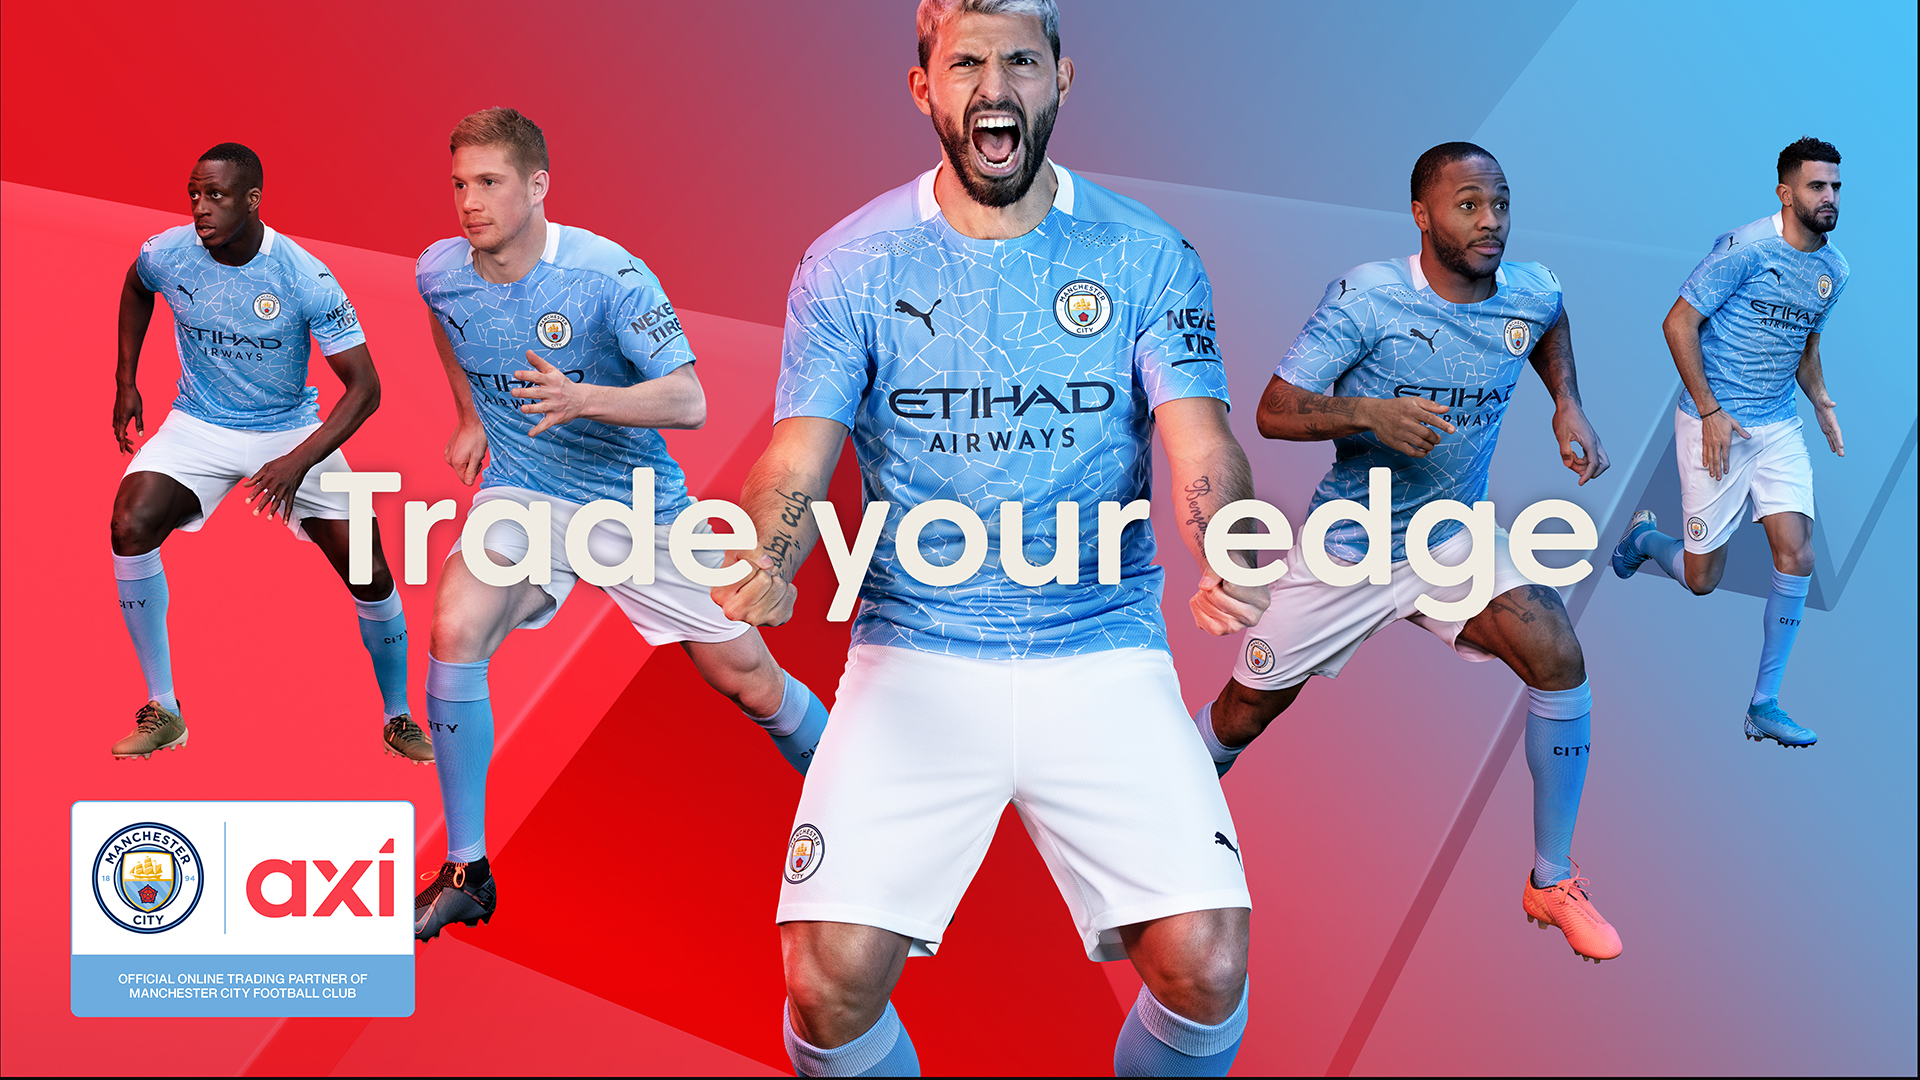 Image for Manchester City Announces New Partnership With Axi